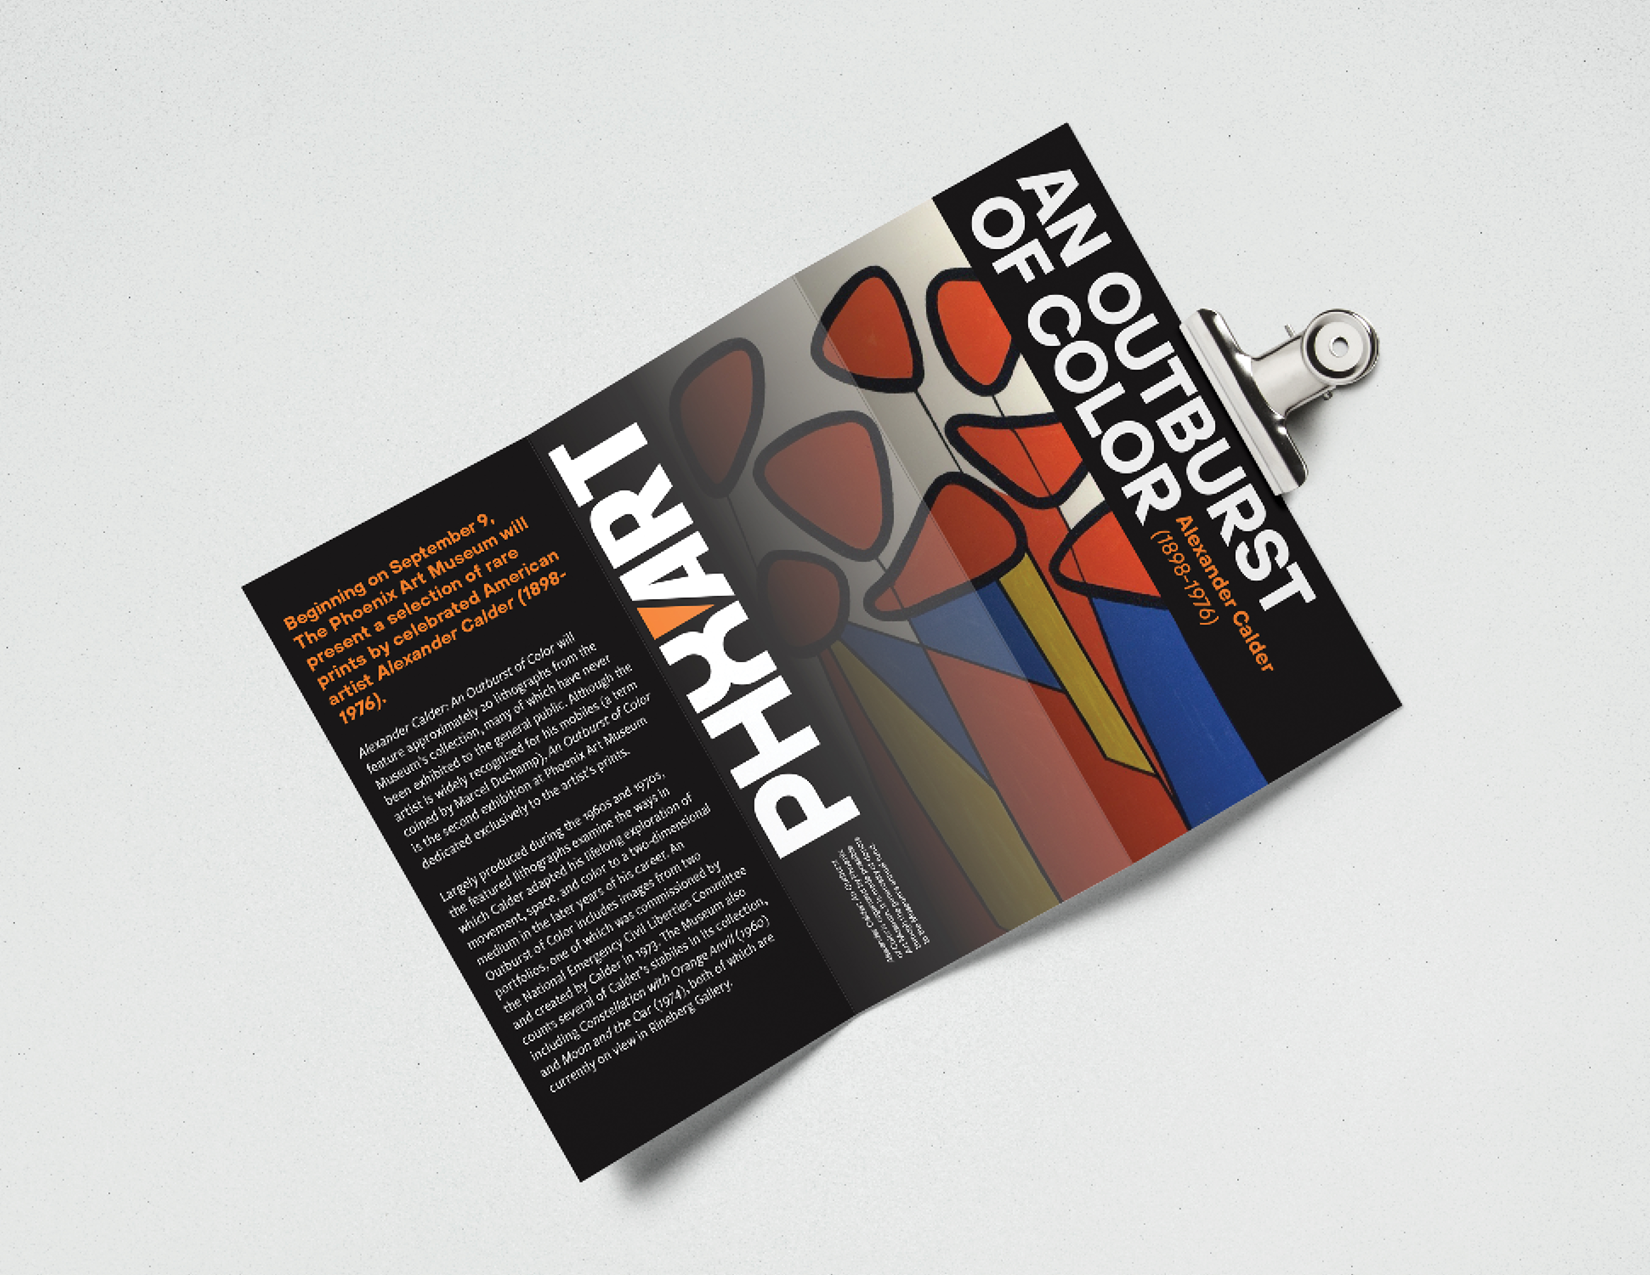 A brochure mockup, hung sideways on a wall. It shows my brand in use for an Alexander Calder exhibit. The brochure features bright, colorful and bold typography on a dark colored background. There is an image of Calder's work fading into the brochure between the front and center fold.